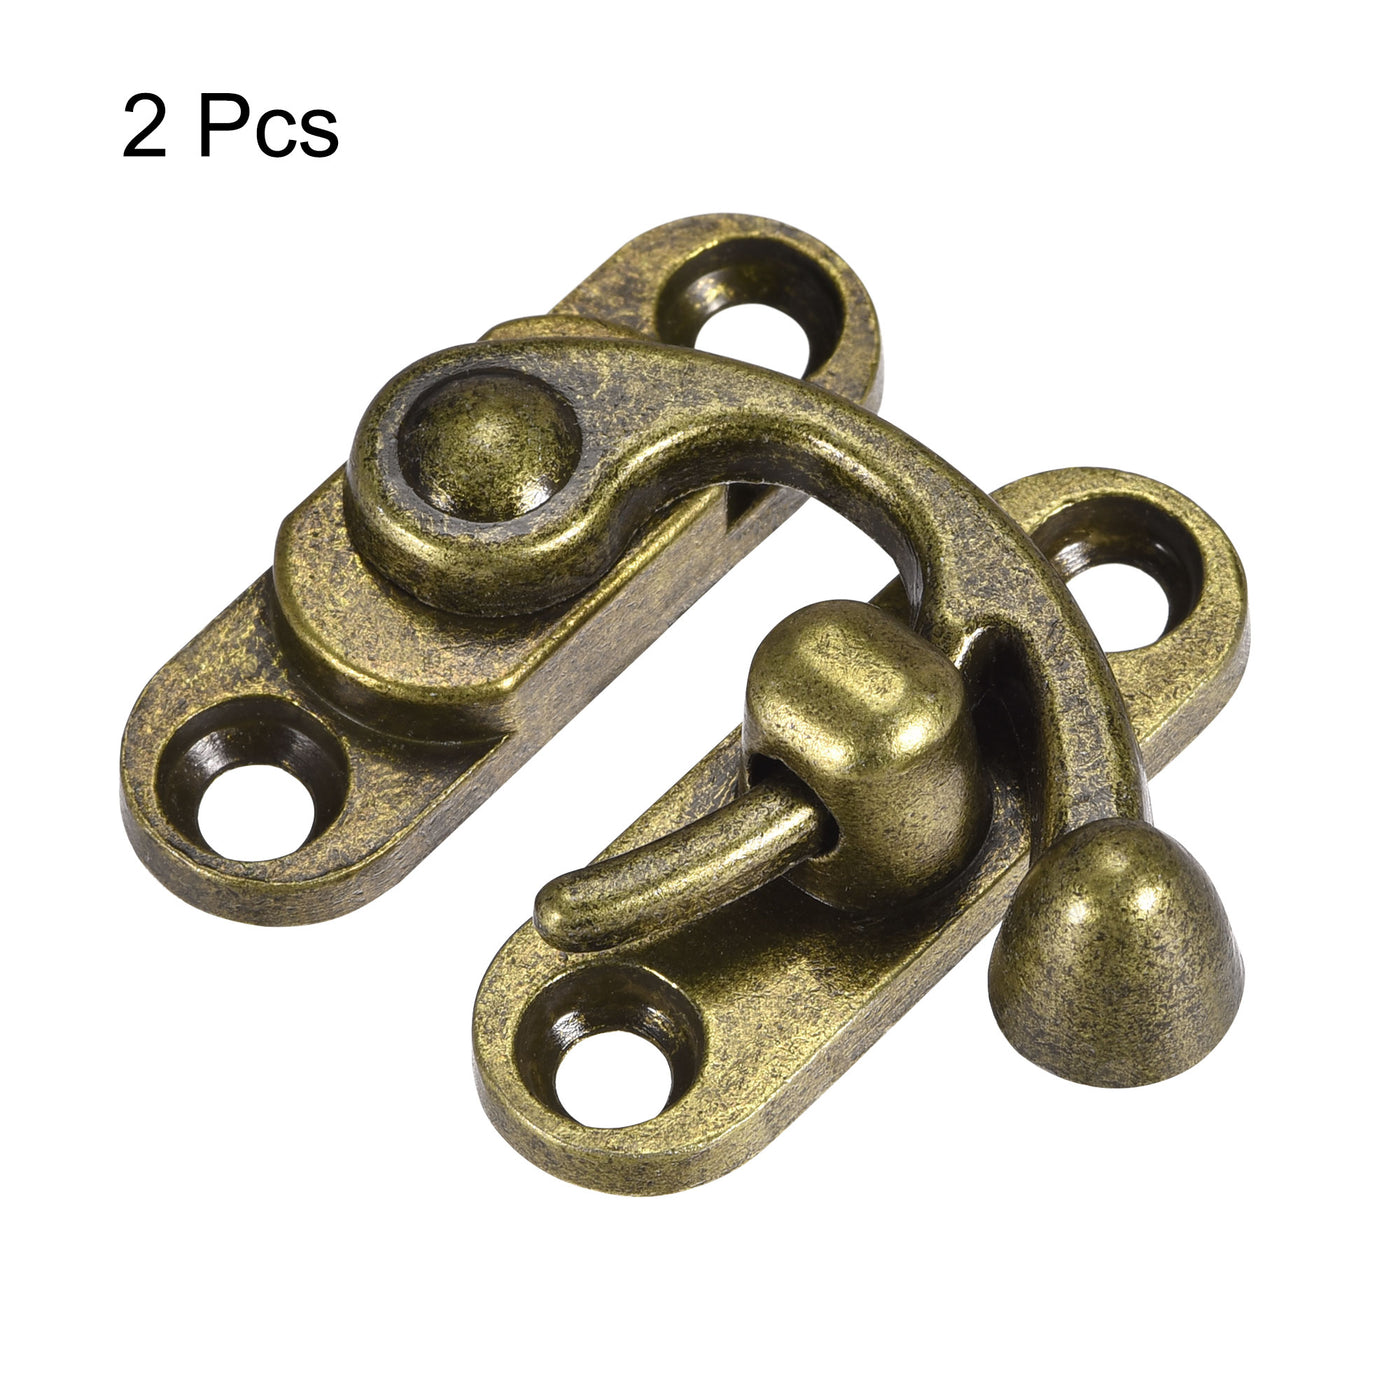 uxcell Uxcell Antique Vintage Lock Clasp Right Latch Hook Hasp 45mmx39mm Swing Arm Latch Bronze Tone 2 Pcs